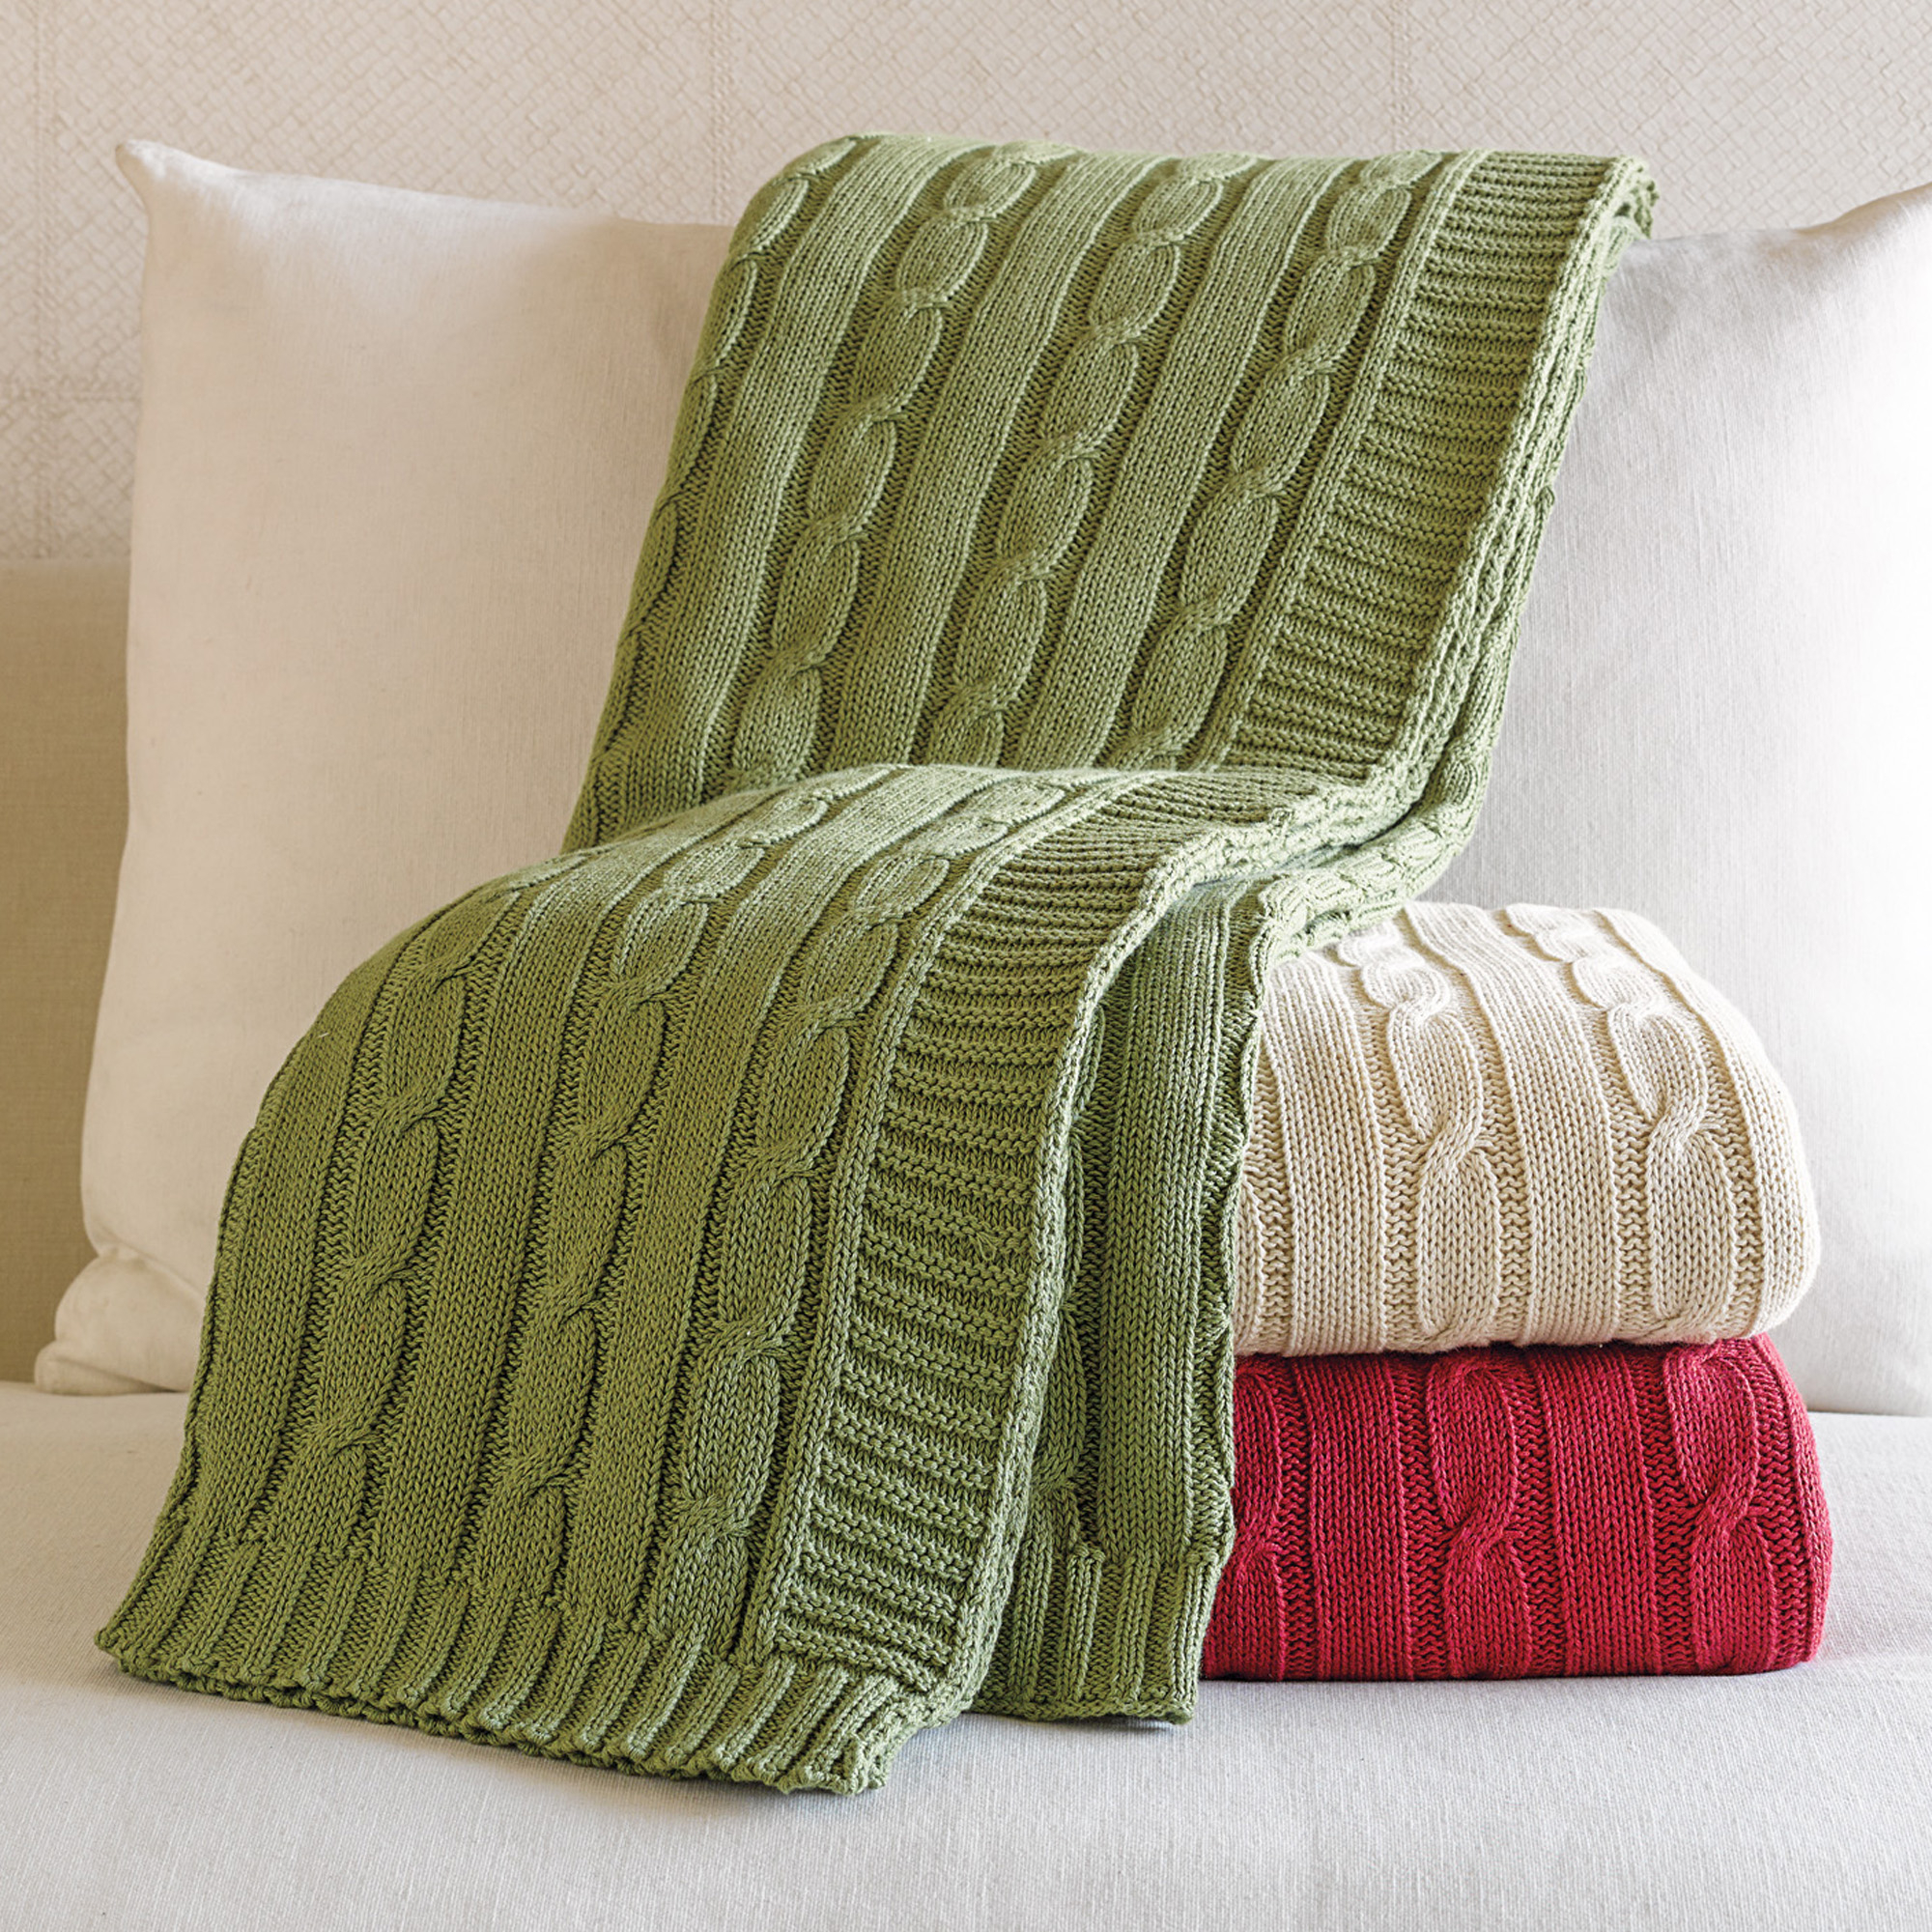 Cable-Knit Cotton Throw | Gump's